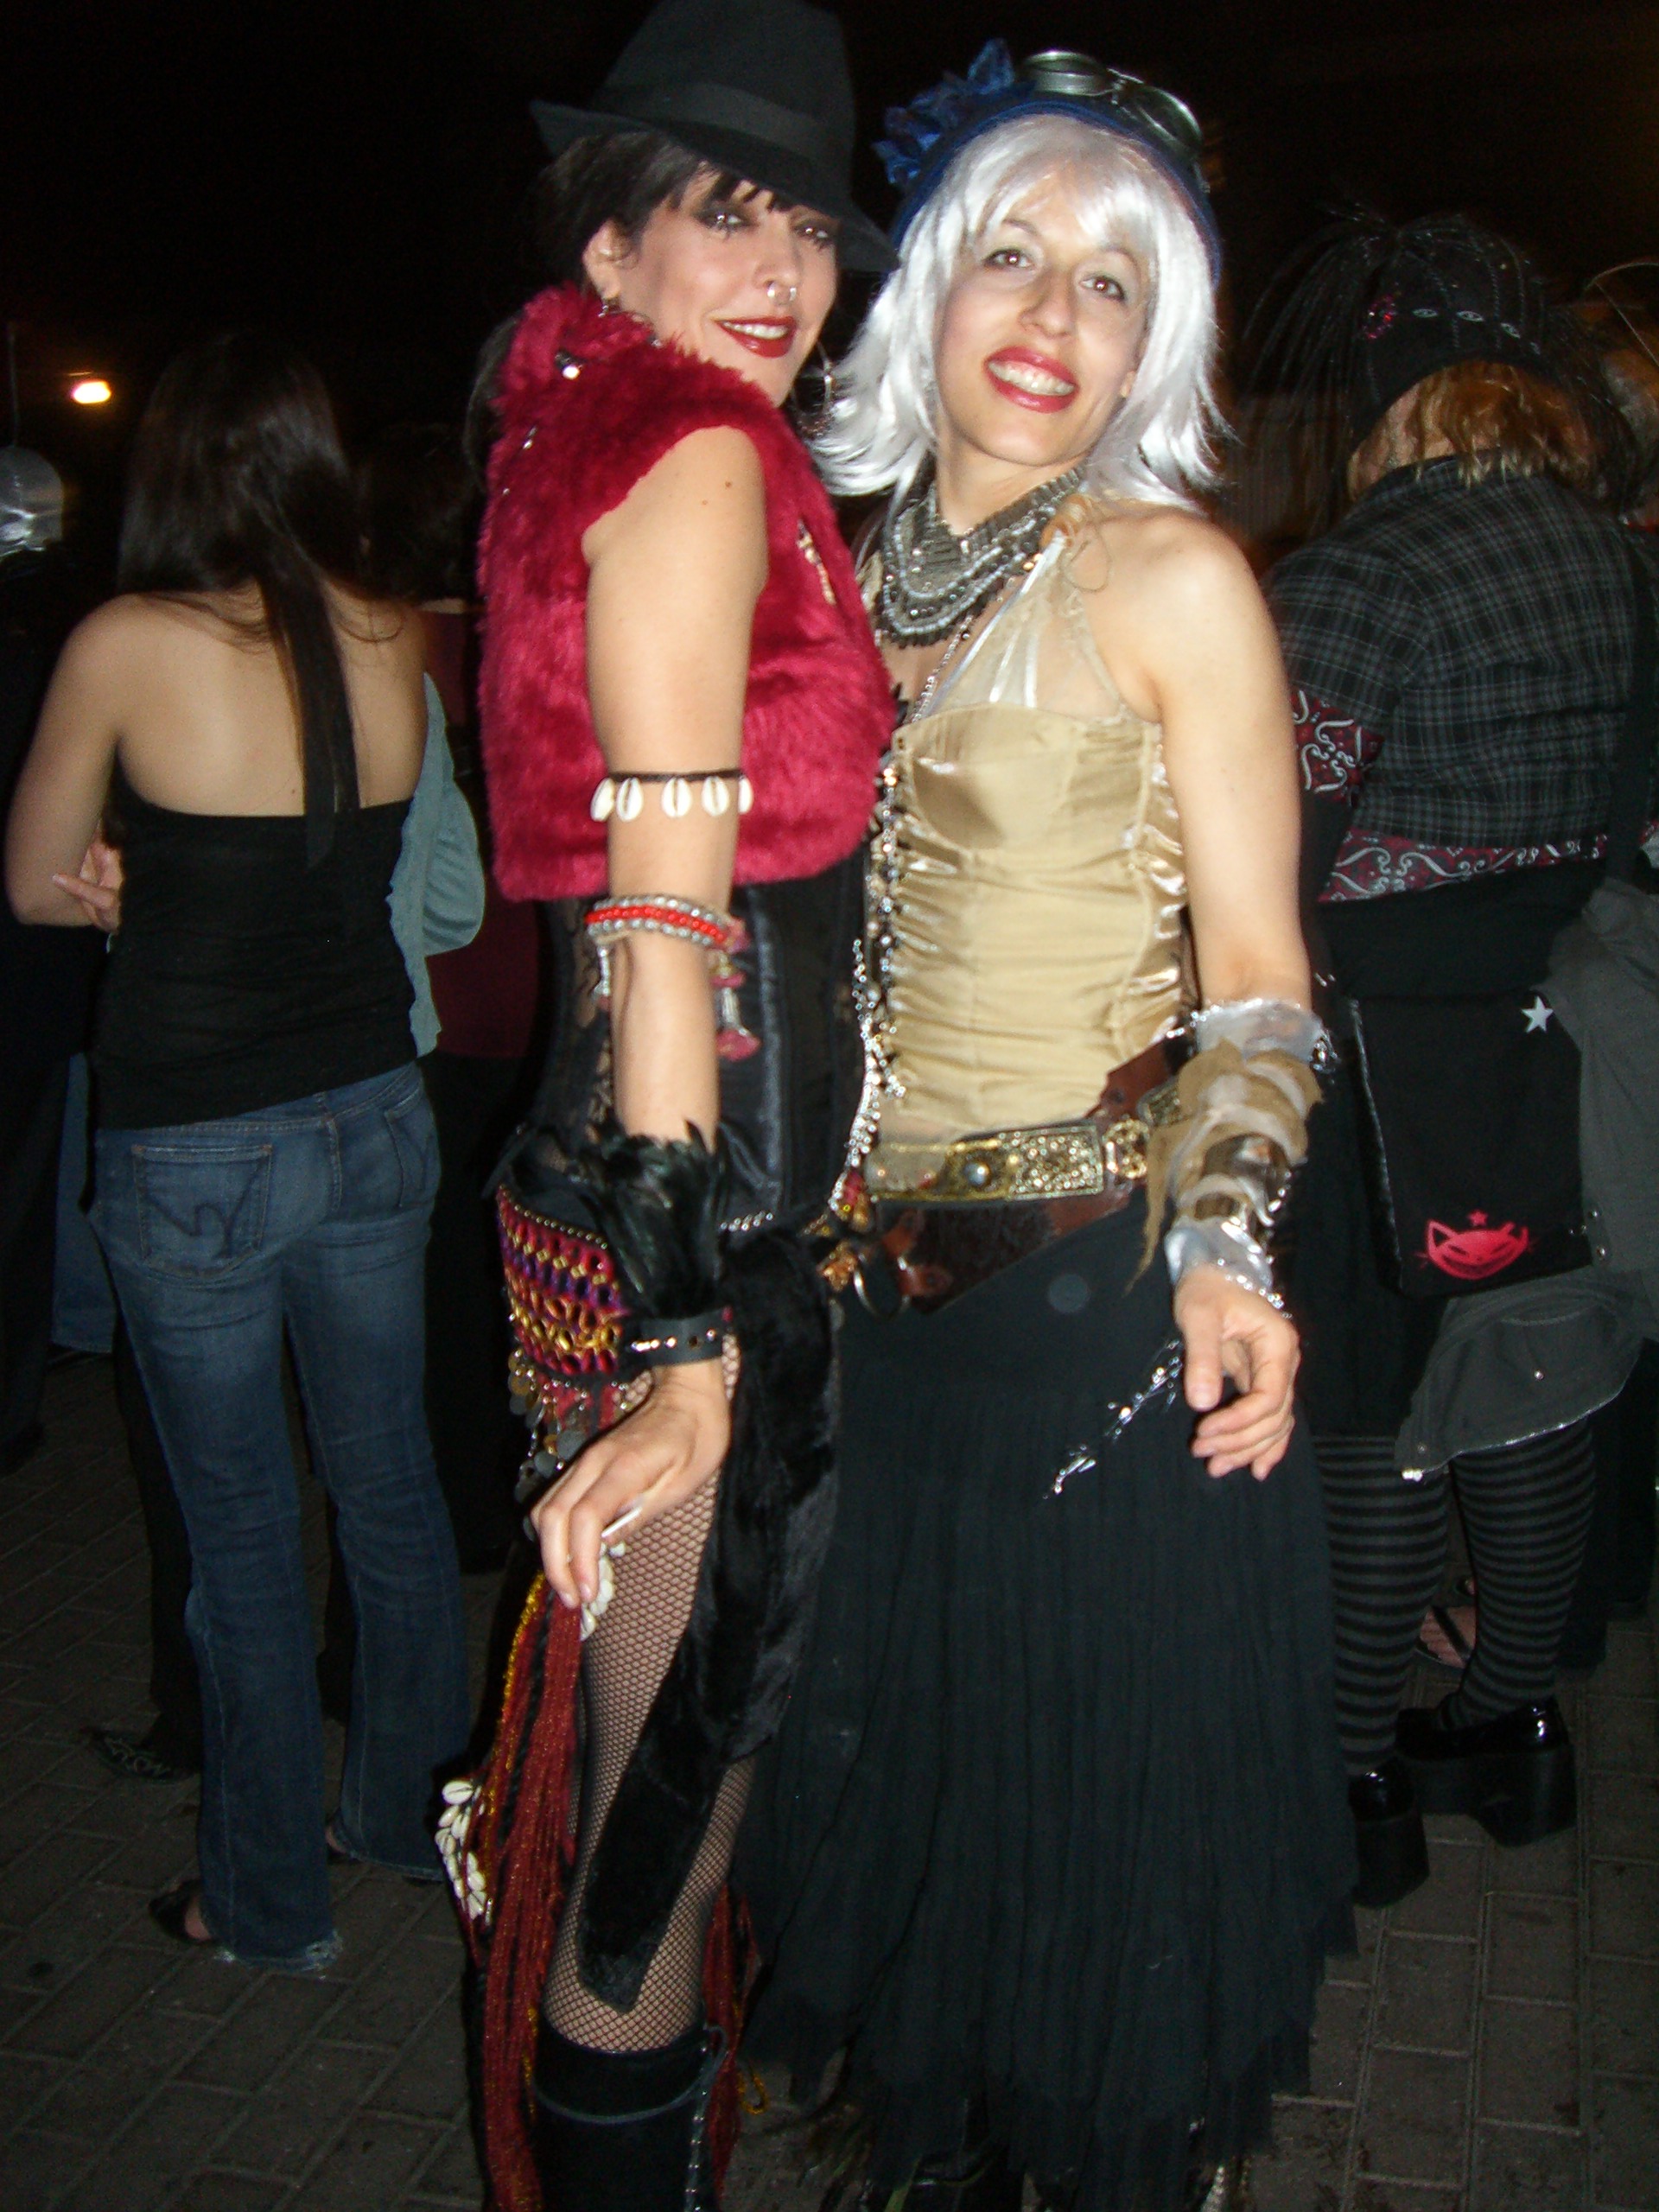 Red-and-black, champagne-and-black, steampunk arm brace - Steampunk party at SXSW 2007